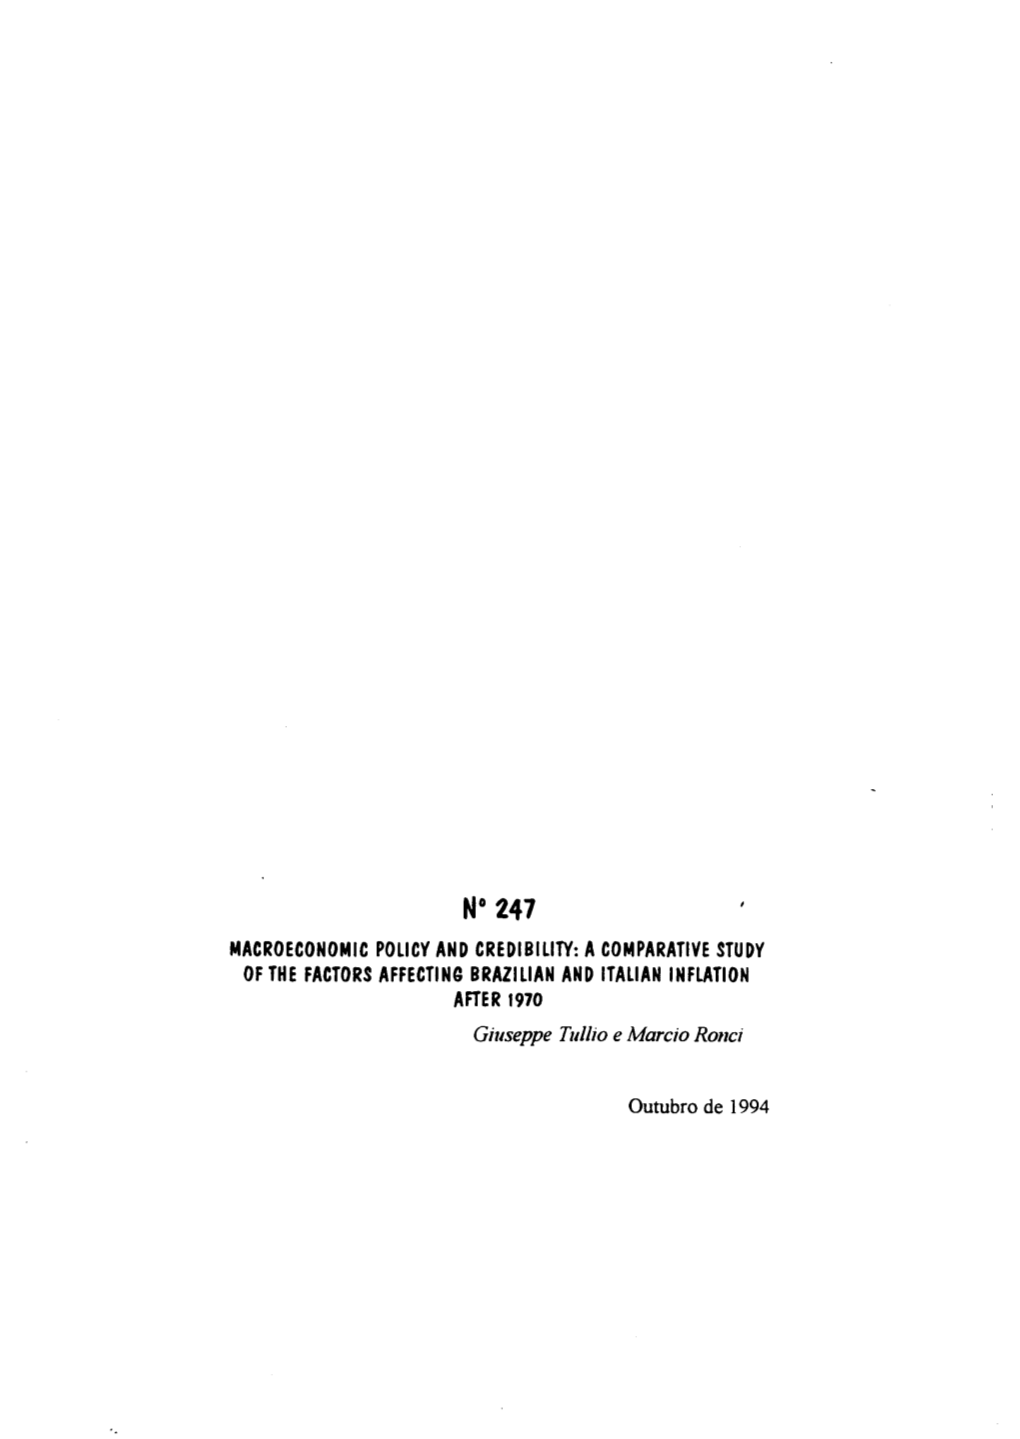 N° 247 MACROECONOMIC Pollcy and Credibillty: a Comparatlve STUDY of the FACTORS Affectlng Brazillan and Itallan Inflatlon AFTER 1970 Gillseppe Tullio E Marcio Rollci